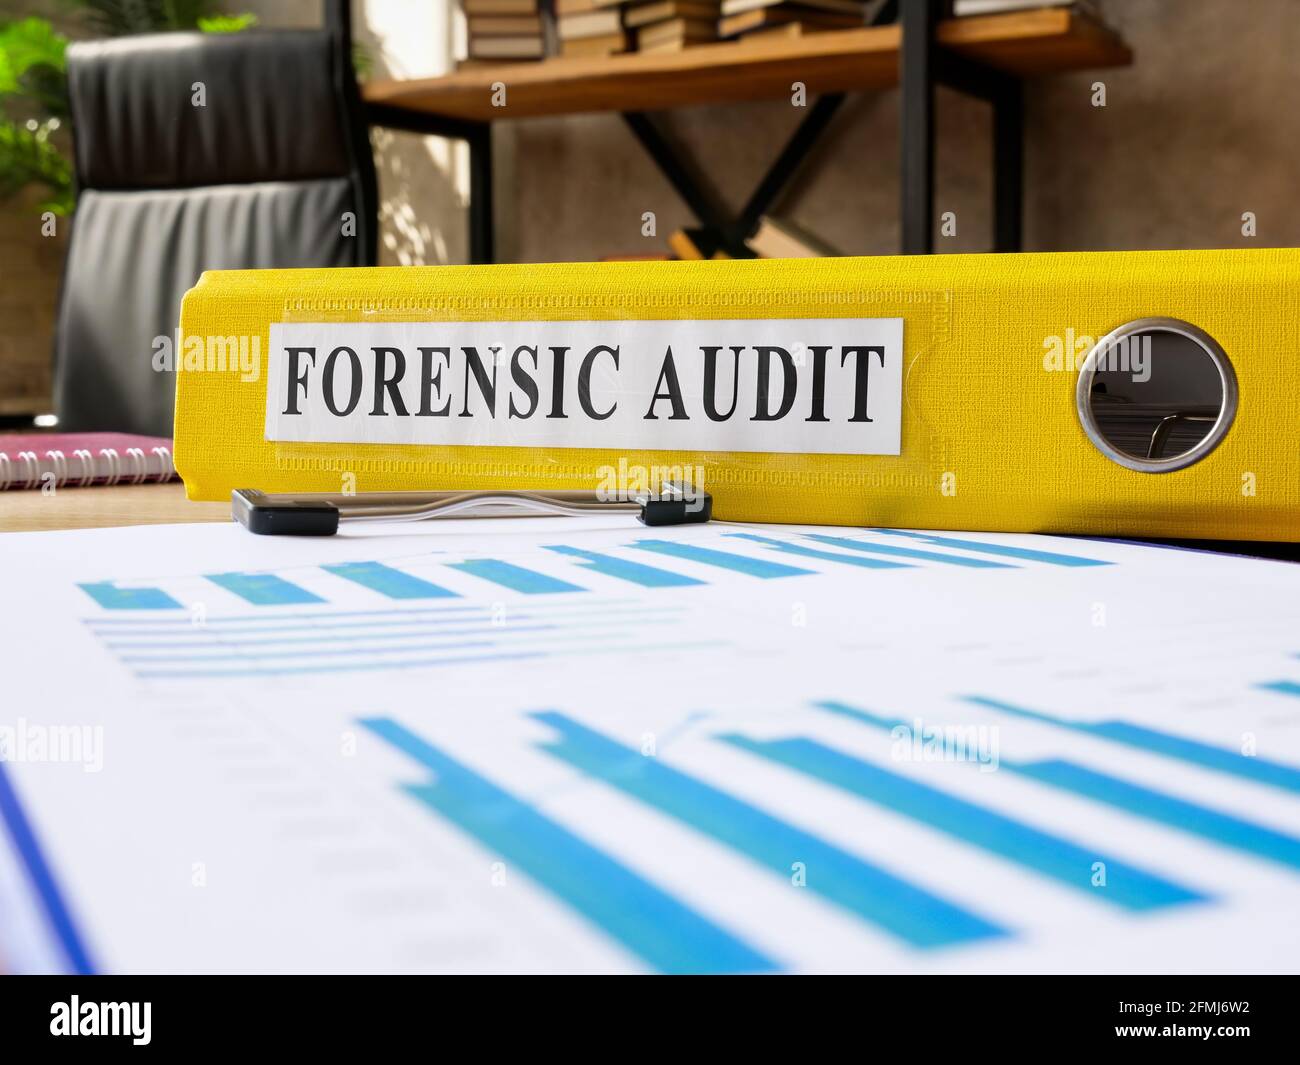 Forensic audit results in the yellow folder and papers. Stock Photo